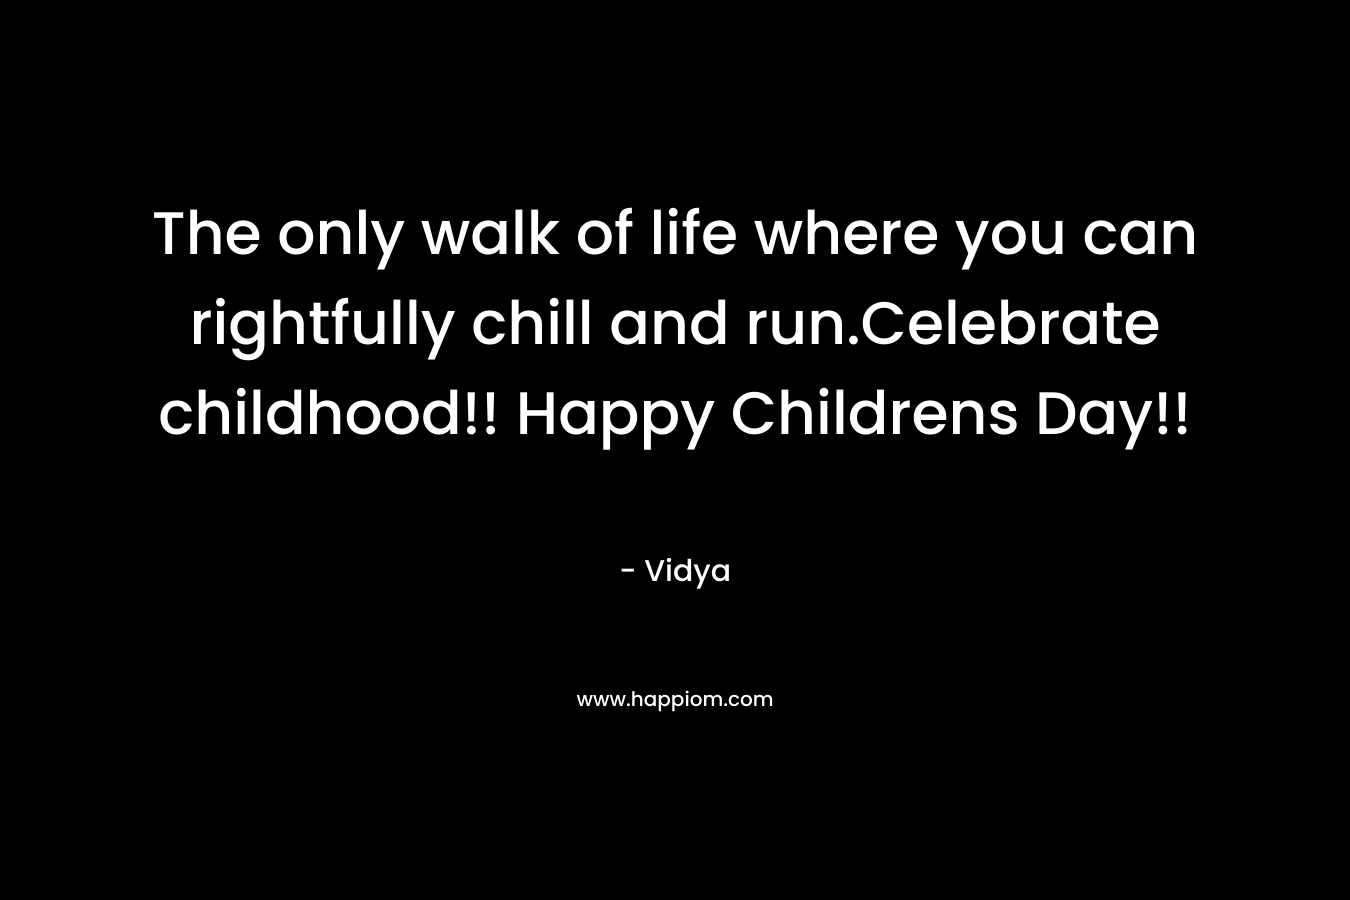 The only walk of life where you can rightfully chill and run.Celebrate childhood!! Happy Childrens Day!!